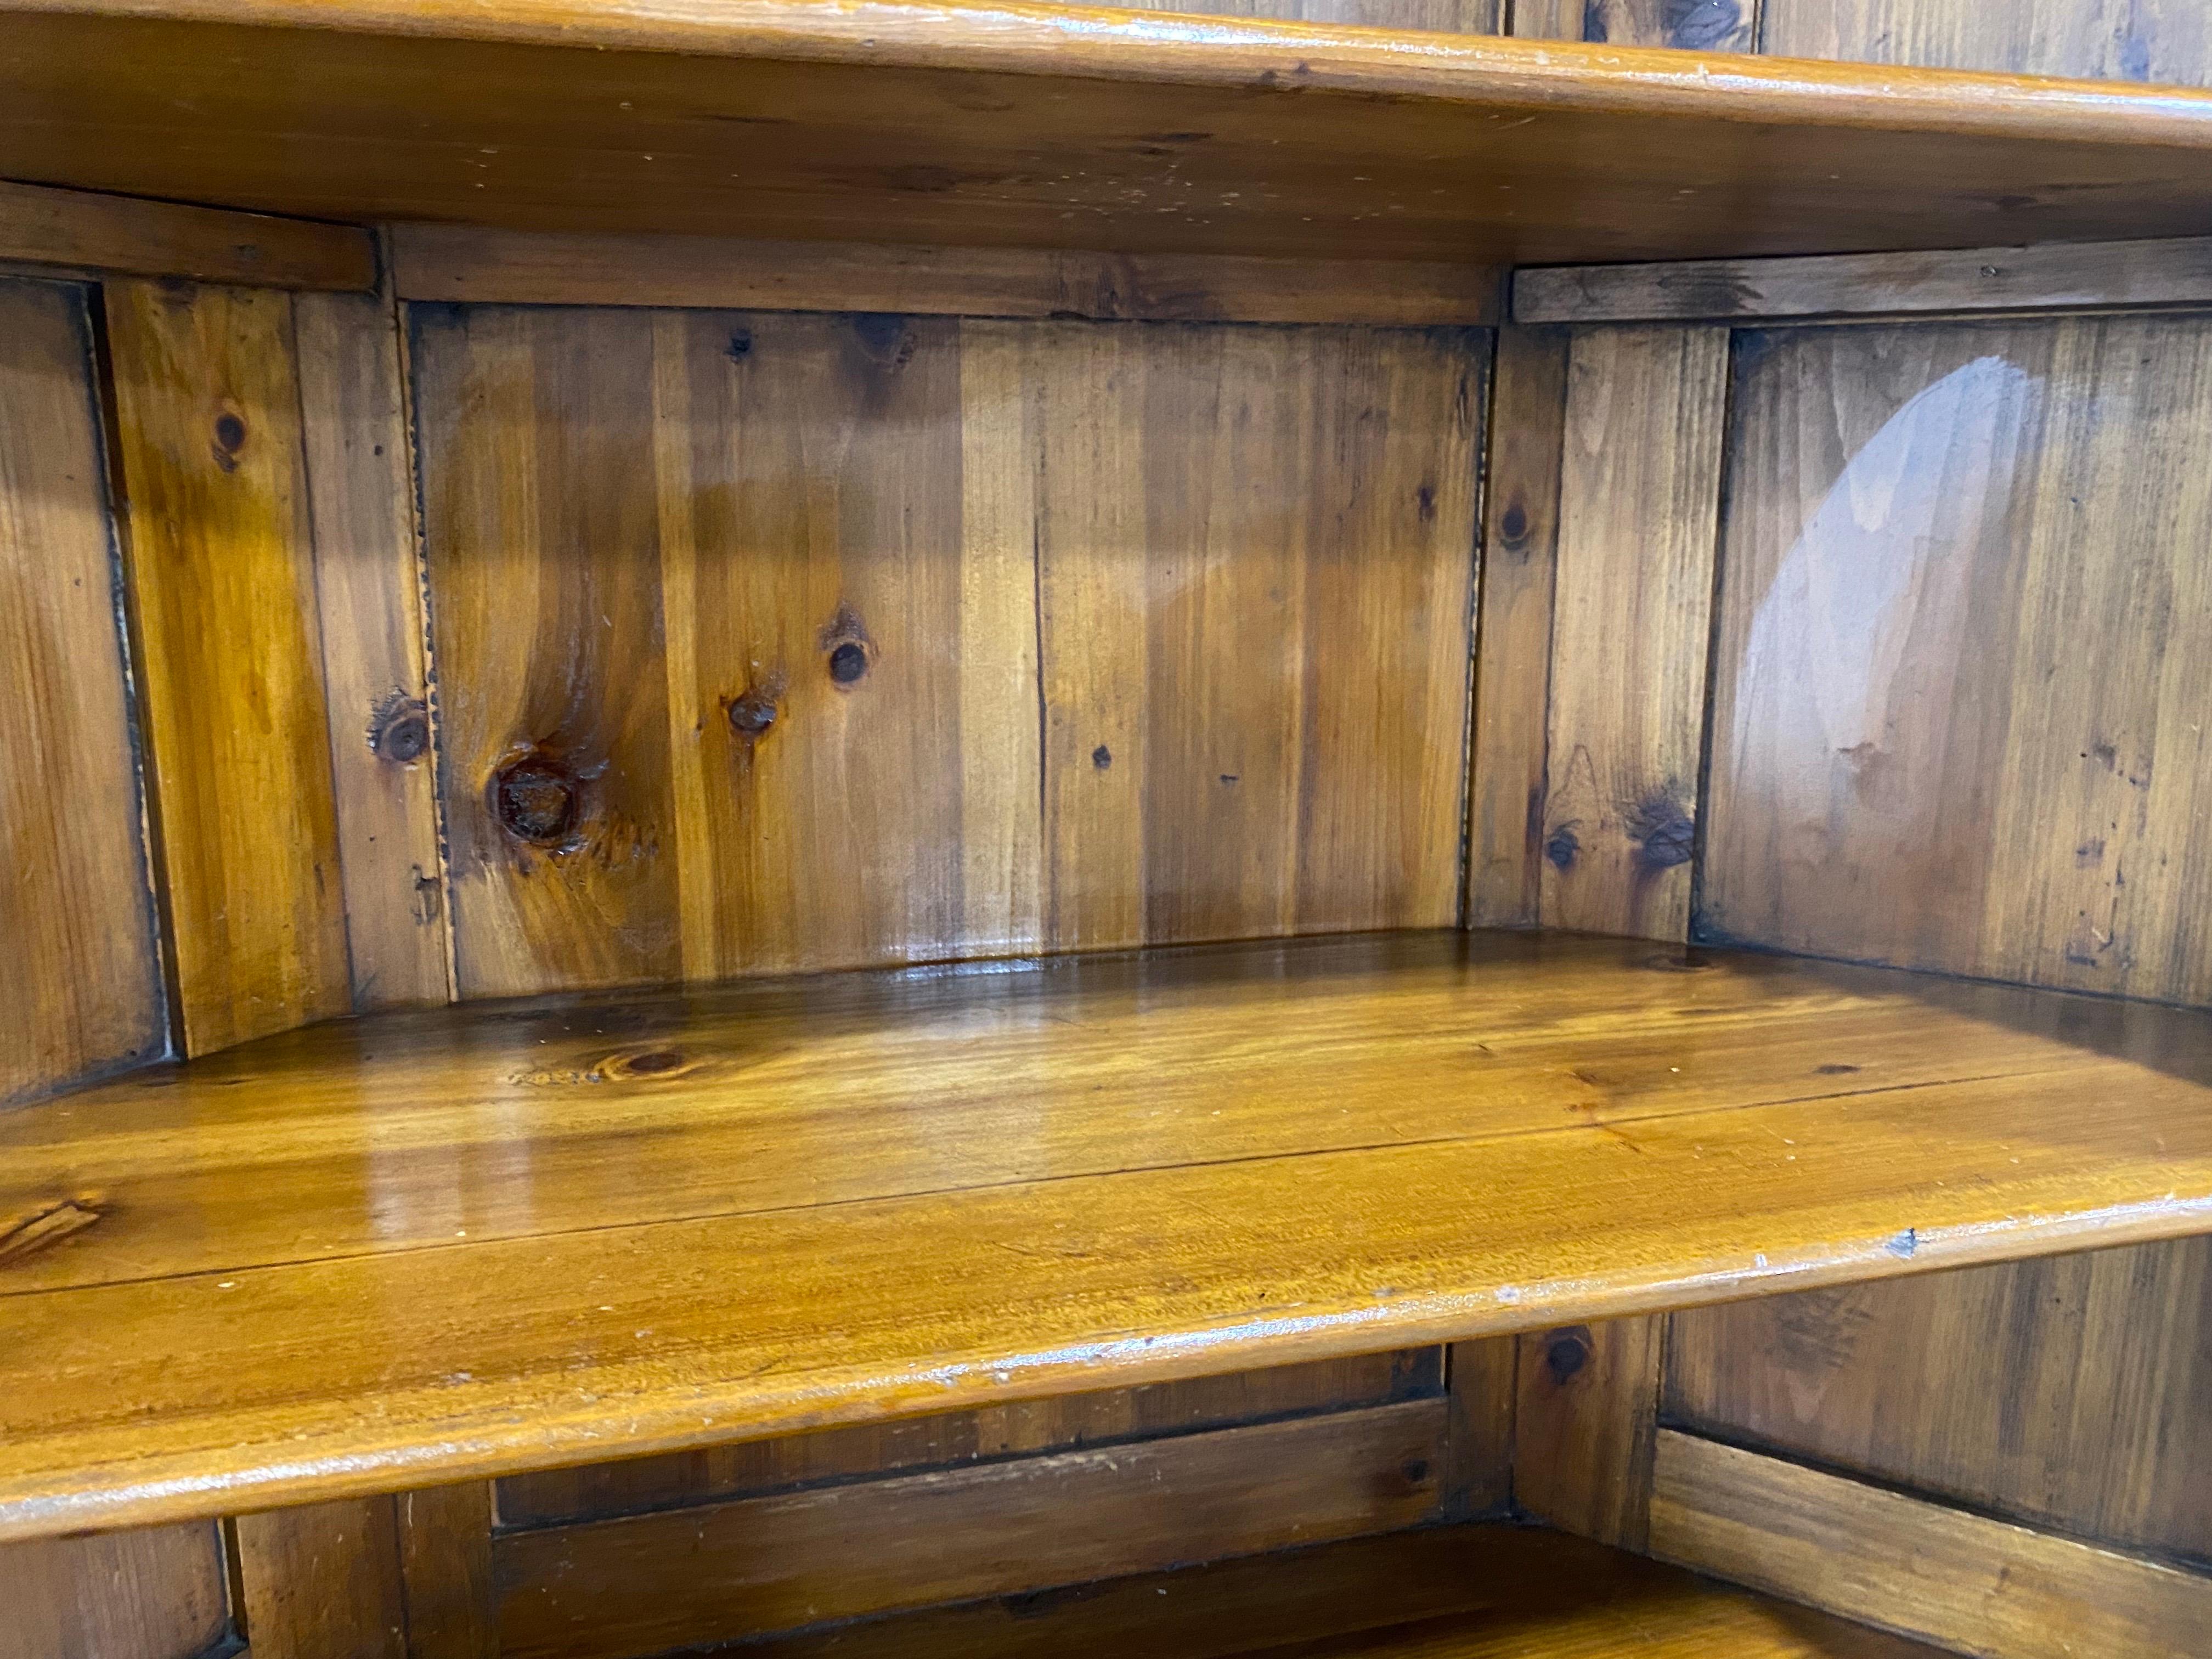 This is a handsome late 20th century vintage hard knotted pine Georgian style corner cabinet. This cabinet has an arched opening with classical columns and two doors at the bottom. The cabinet has a beautiful amber brown finish to the surface with